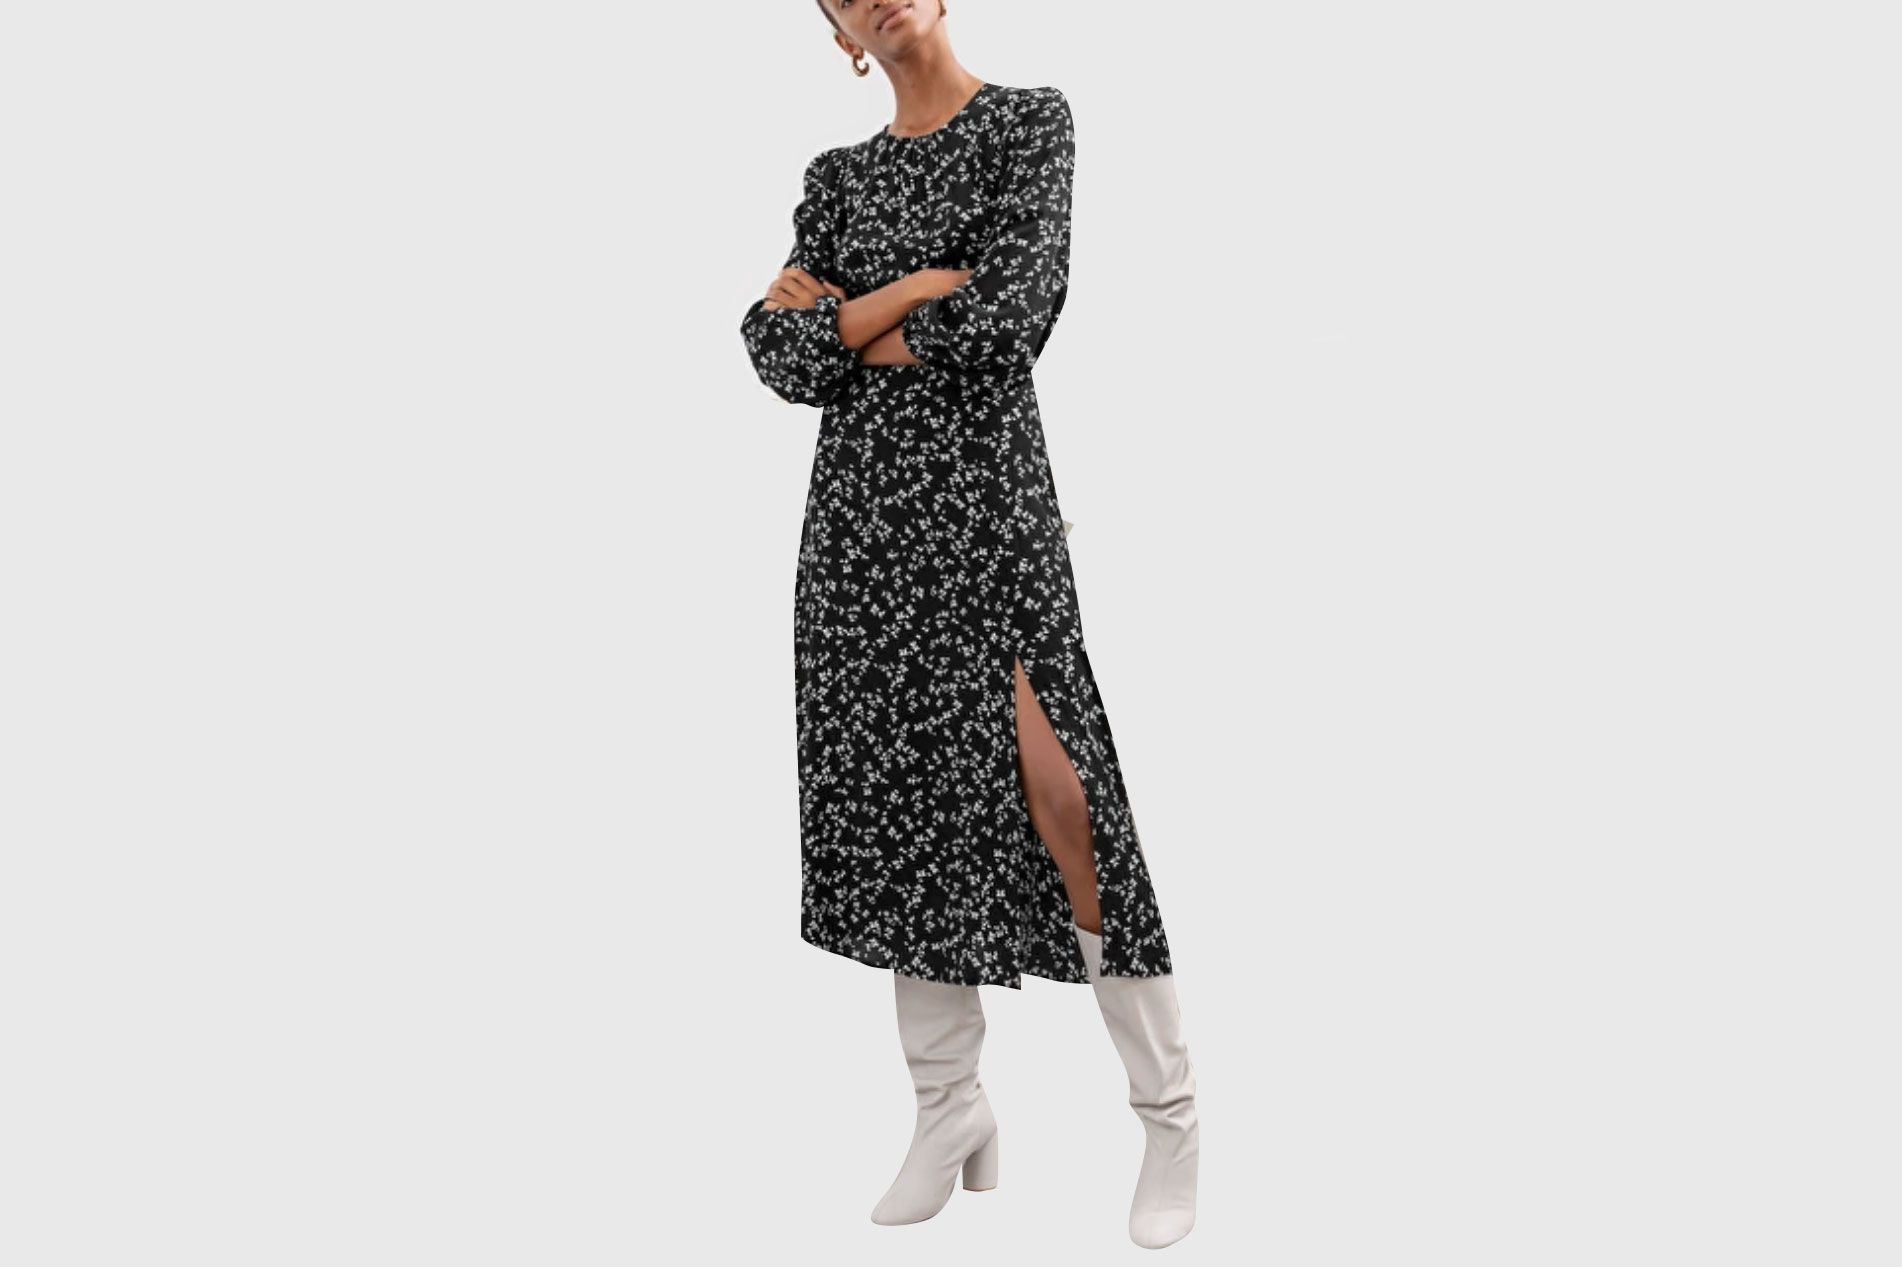 15 Fall Dresses 2019 - Best Stylish Fall Dresses to Wear Now